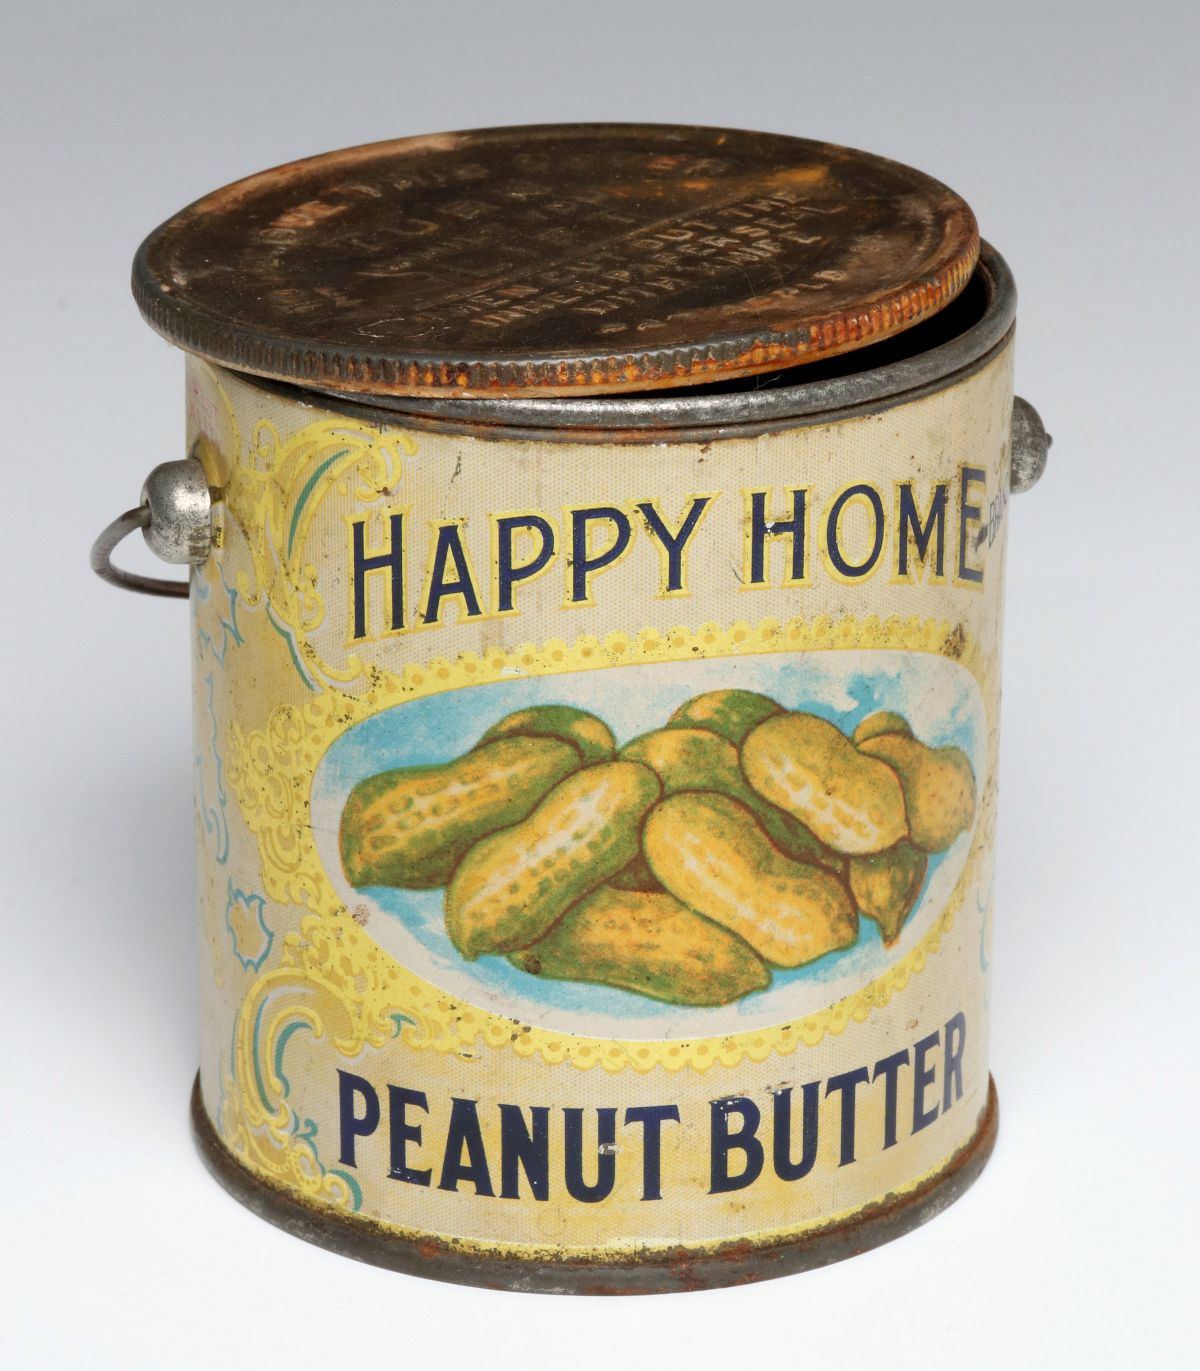 HAPPY HOME BRAND TIN LITHOGRAPH PEANUT BUTTER PAIL